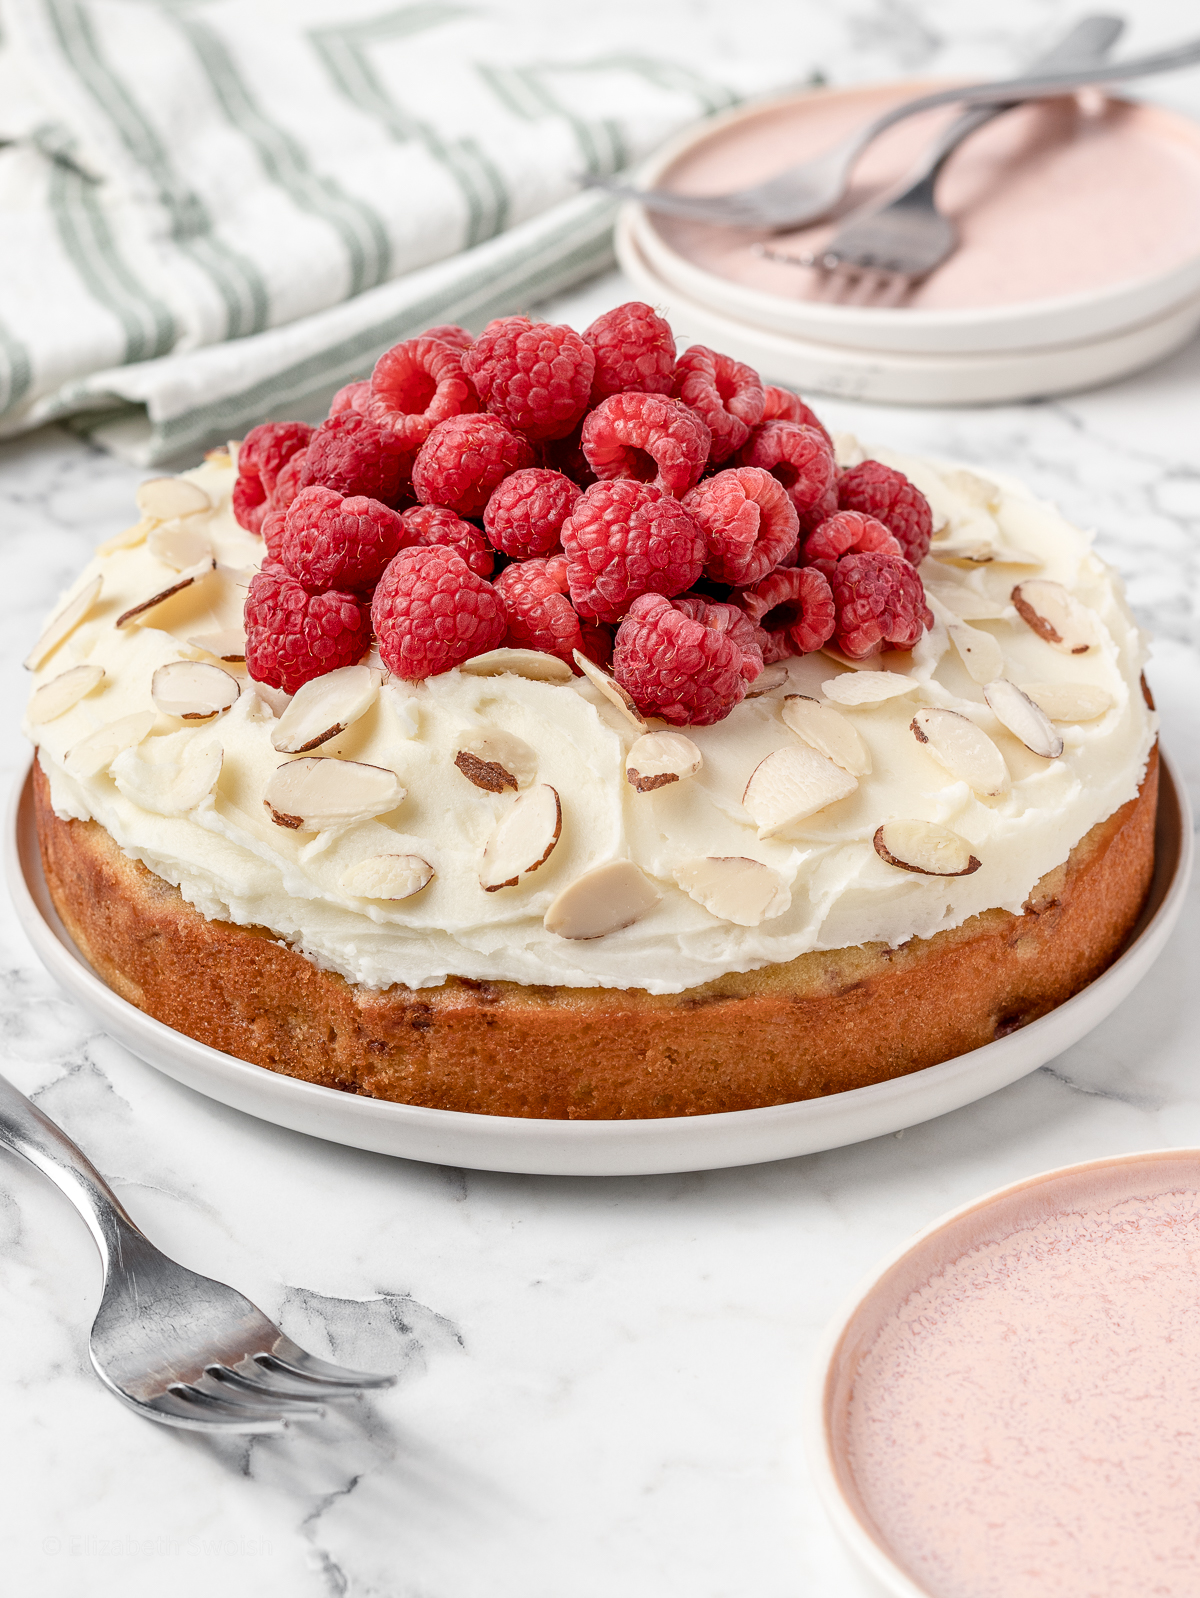 Raspberry and Almond Cake topped with fresh raspberries and almond slices. Forks and plates on the side, ready for eating.